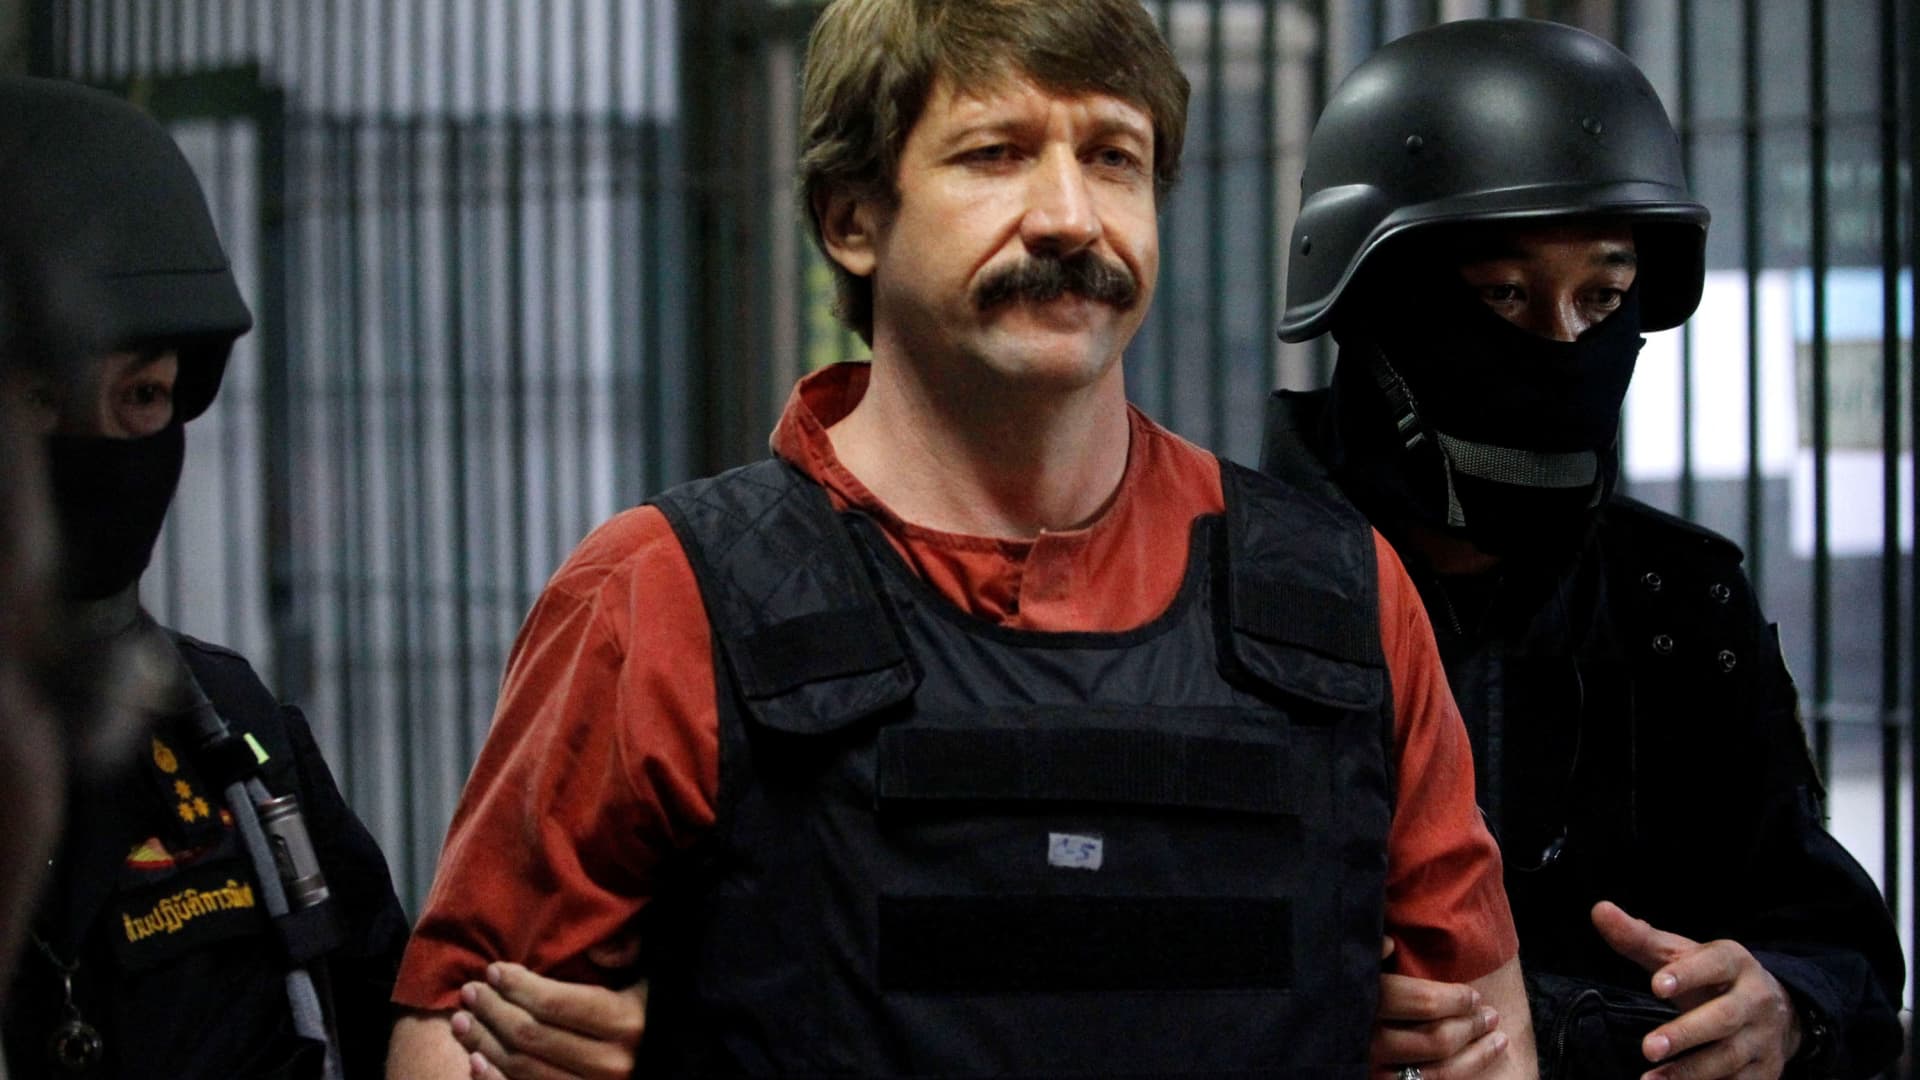 Viktor Bout is escorted by members of a special police unit after a hearing at a criminal court in Bangkok October 5, 2010.